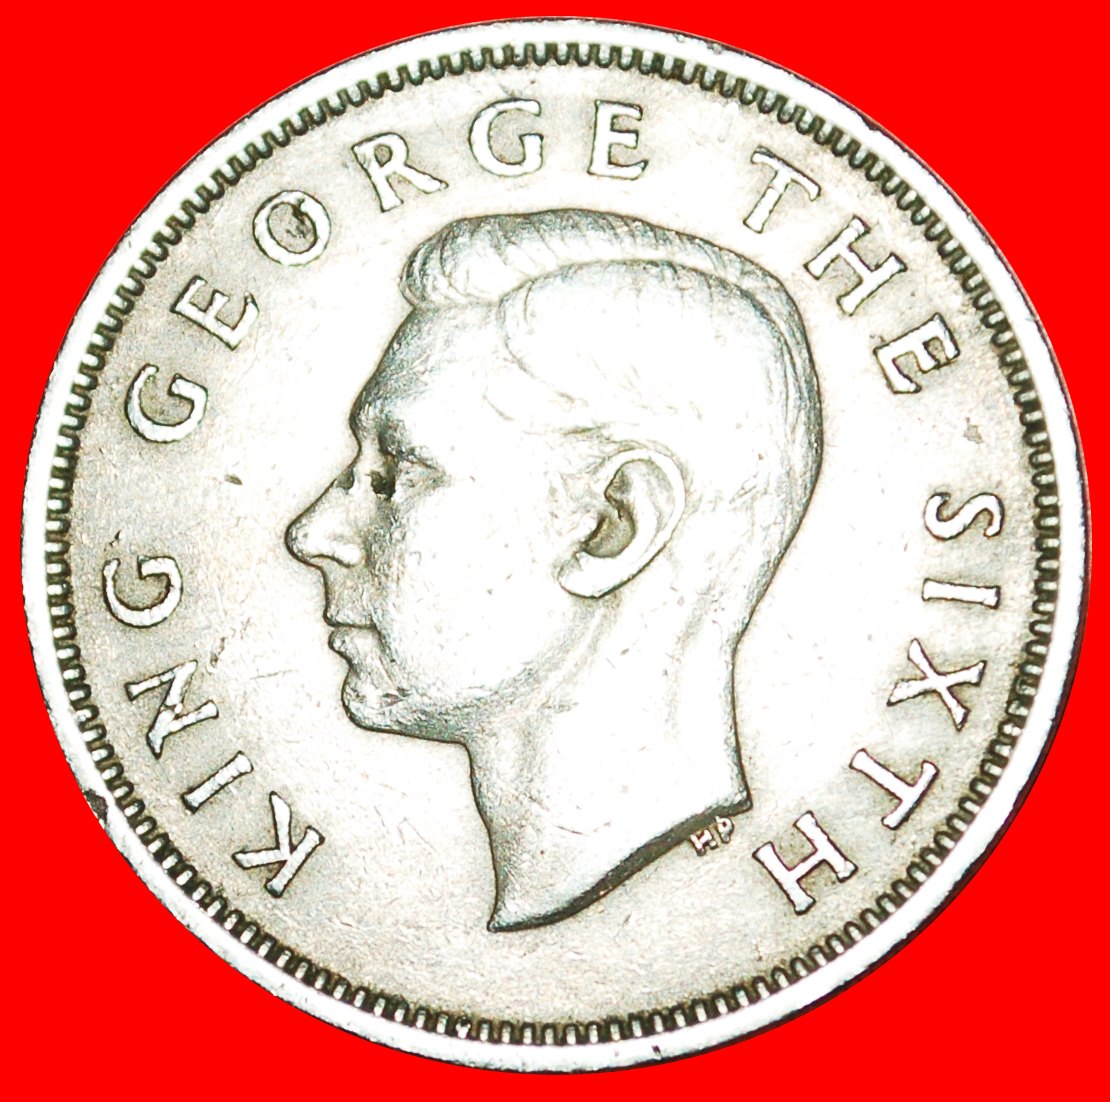  * GREAT BRITAIN (1948-1951): NEW ZEALAND★ FLORIN 1951! GEORGE VI (1937-1952) LOW START ★ NO RESERVE!   